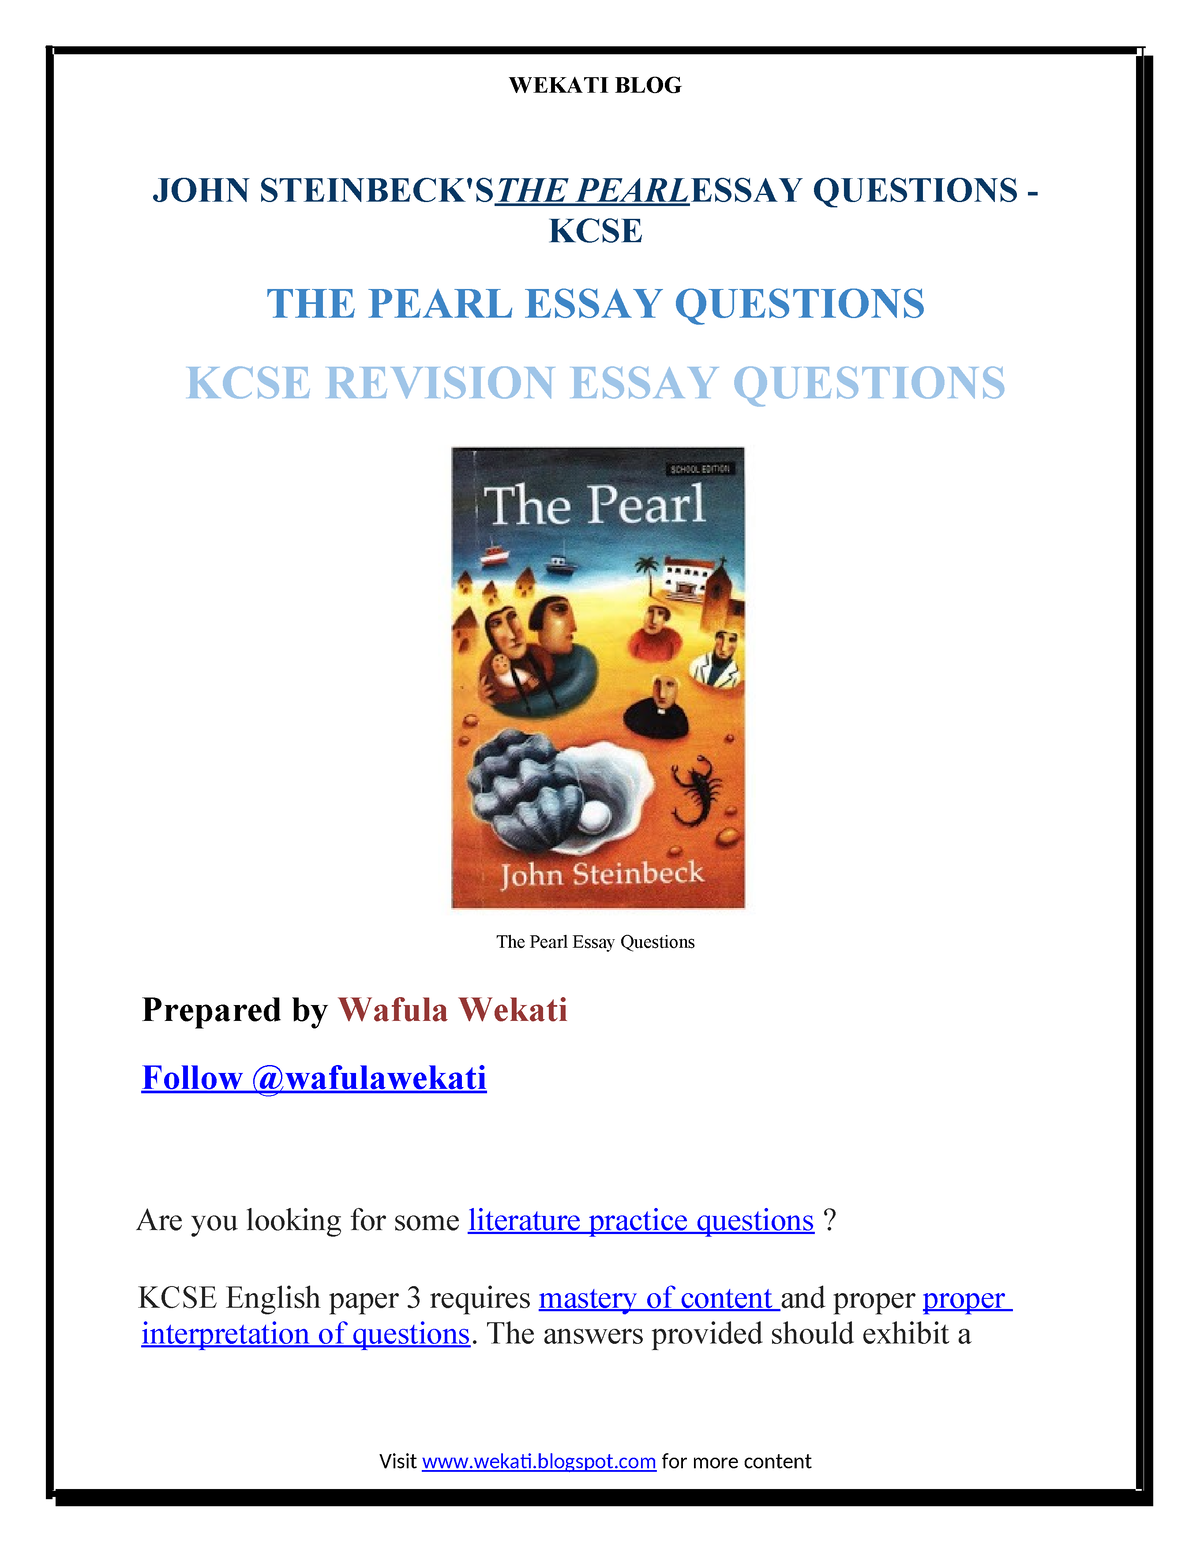 kcse pearl essay questions and answers